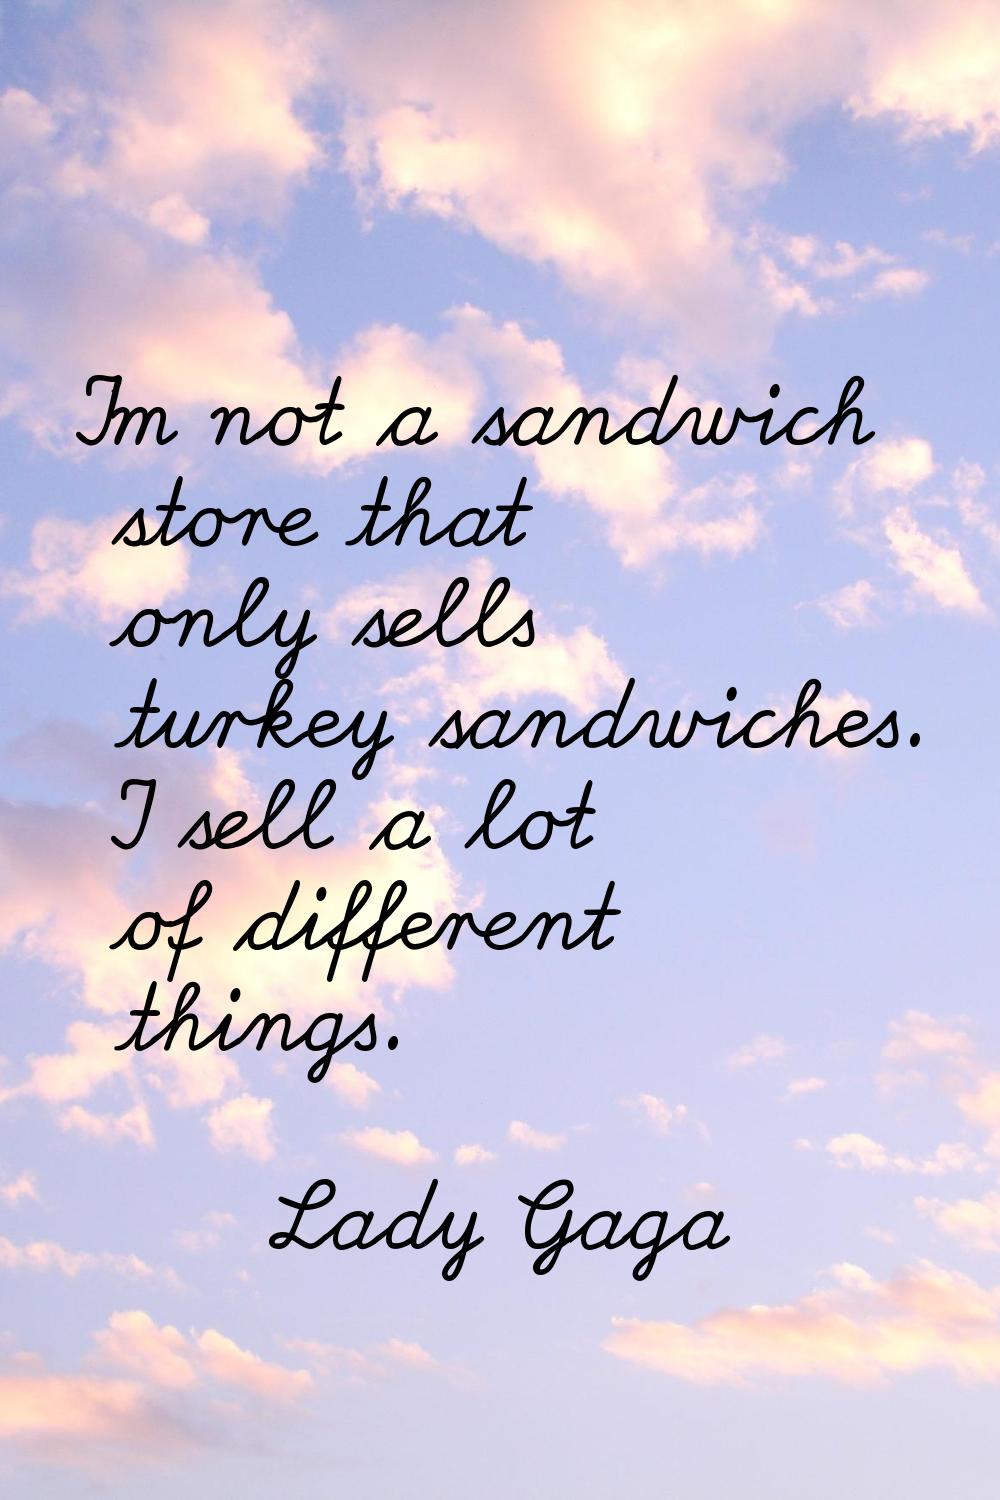 I'm not a sandwich store that only sells turkey sandwiches. I sell a lot of different things.